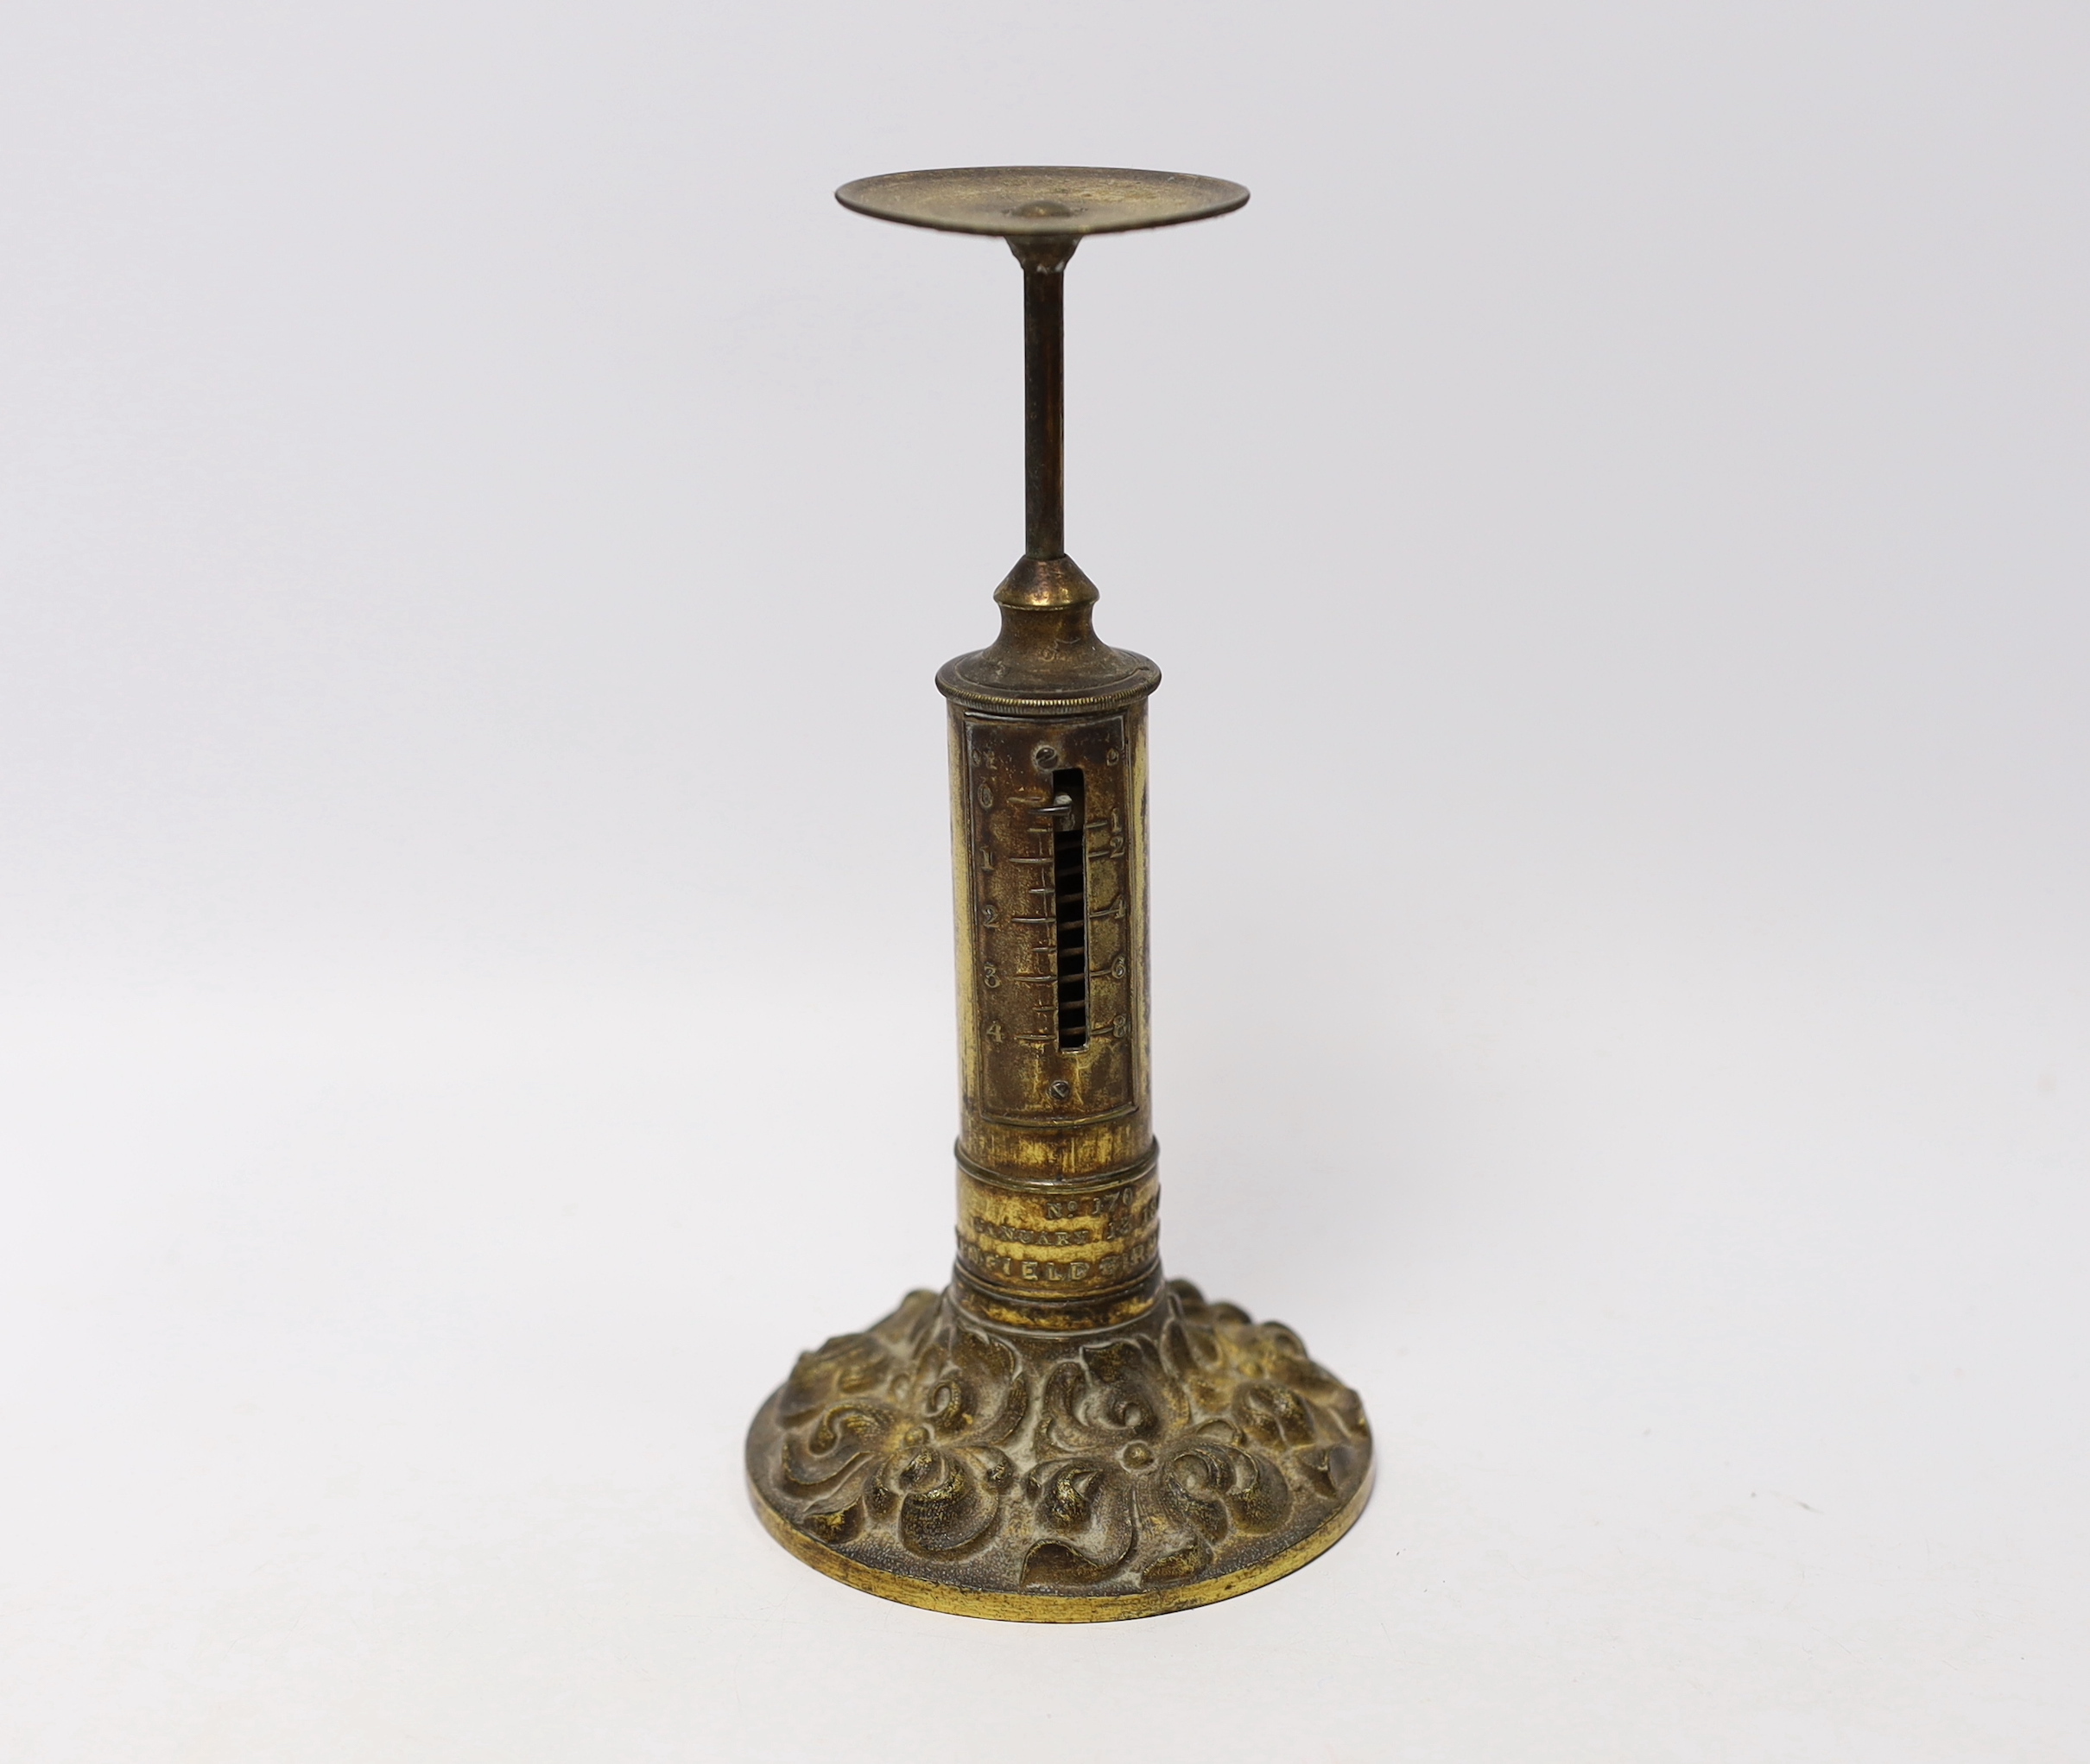 A Winfield 'candlestick' postal scale, 16.5cm